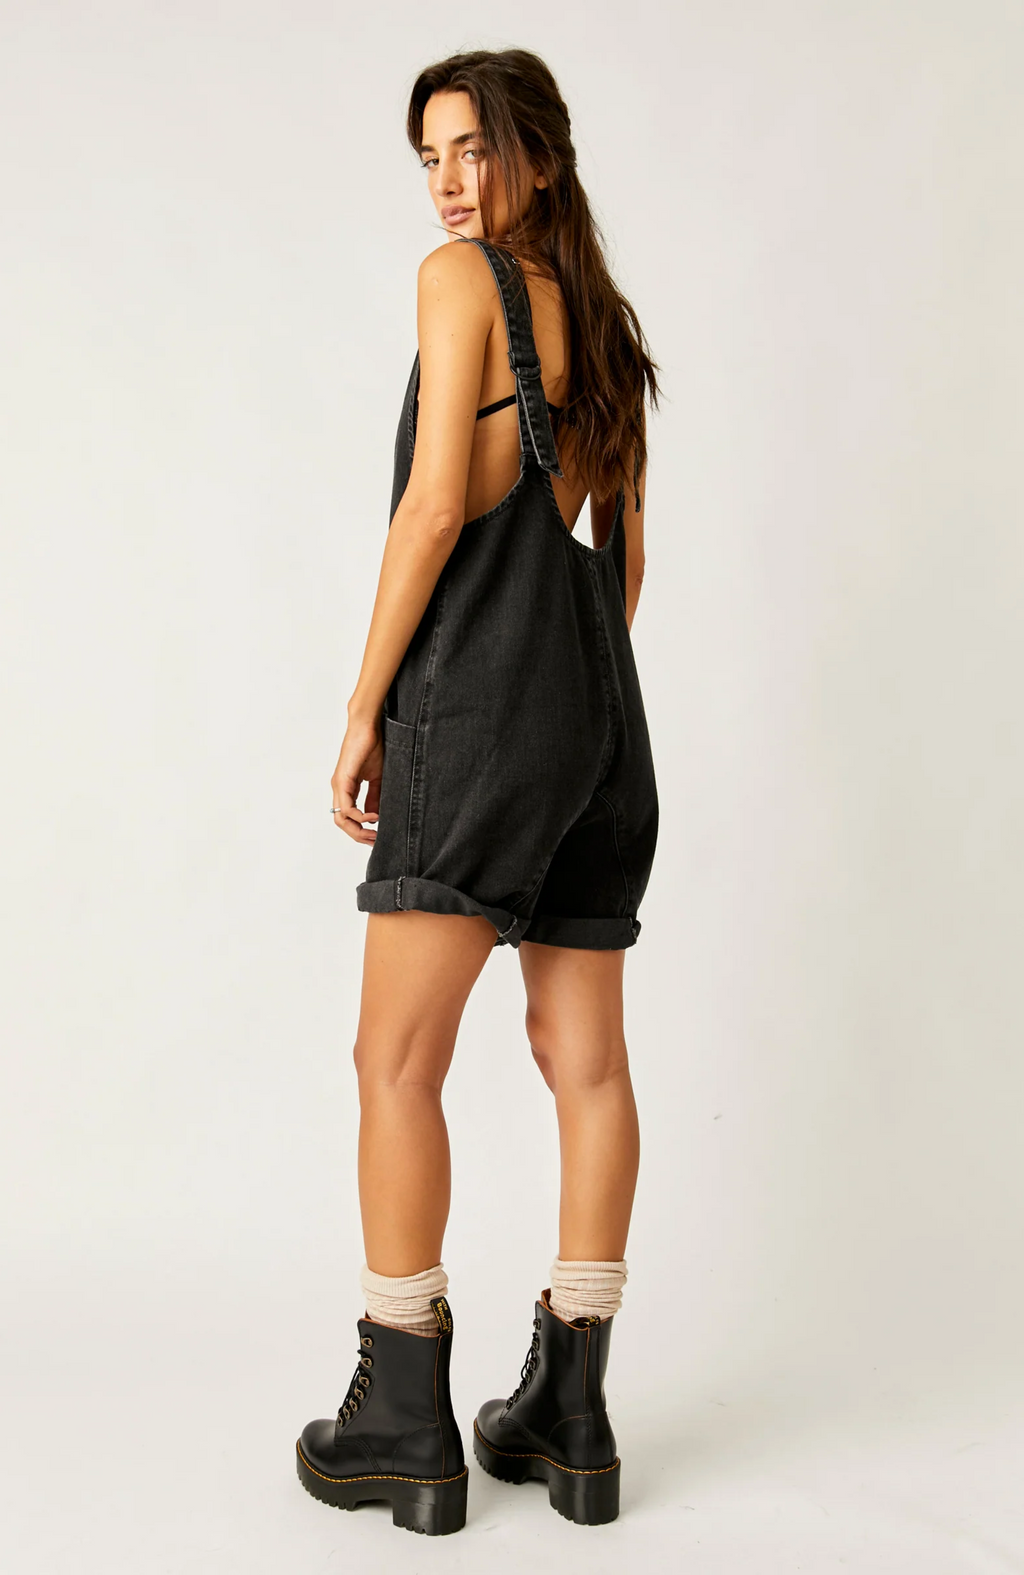 Free People - High Roller Shortall